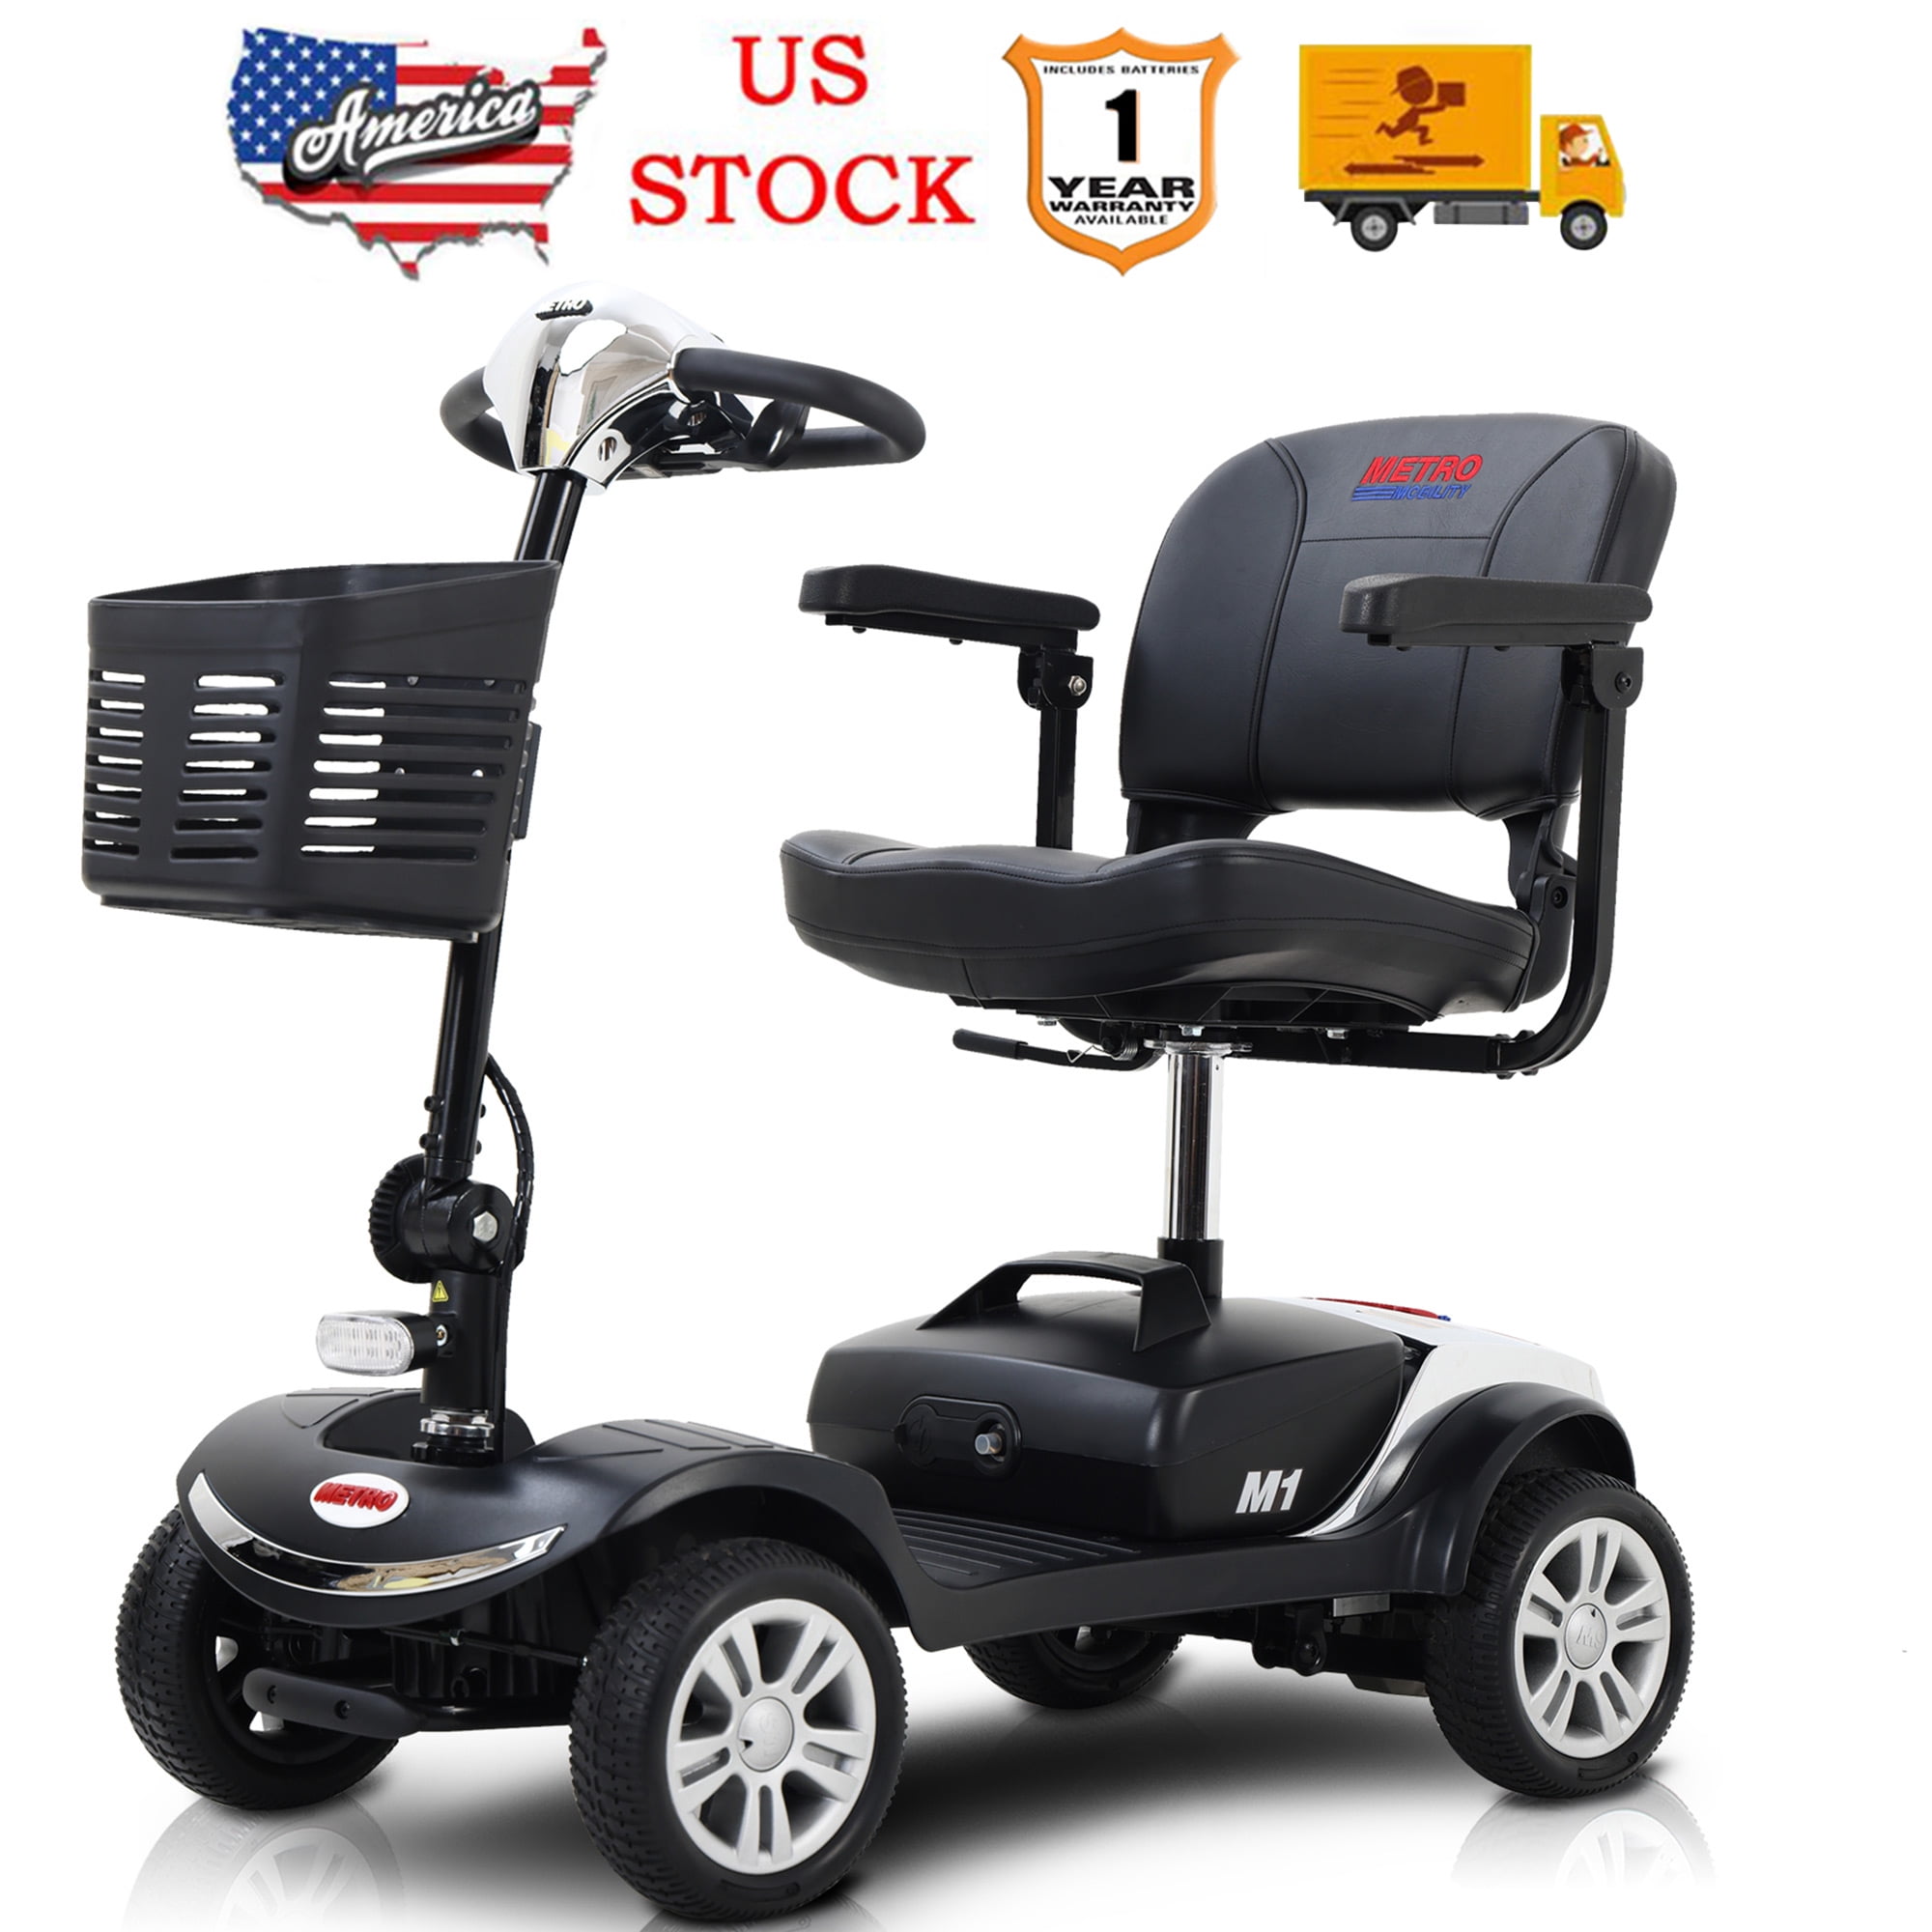 Outdoor Mobility Scooters for Adults Seniors, Anti-Tip 4 Wheel Electrical Scooter with Headlights LED Light, 300lbs, Red - Walmart.com